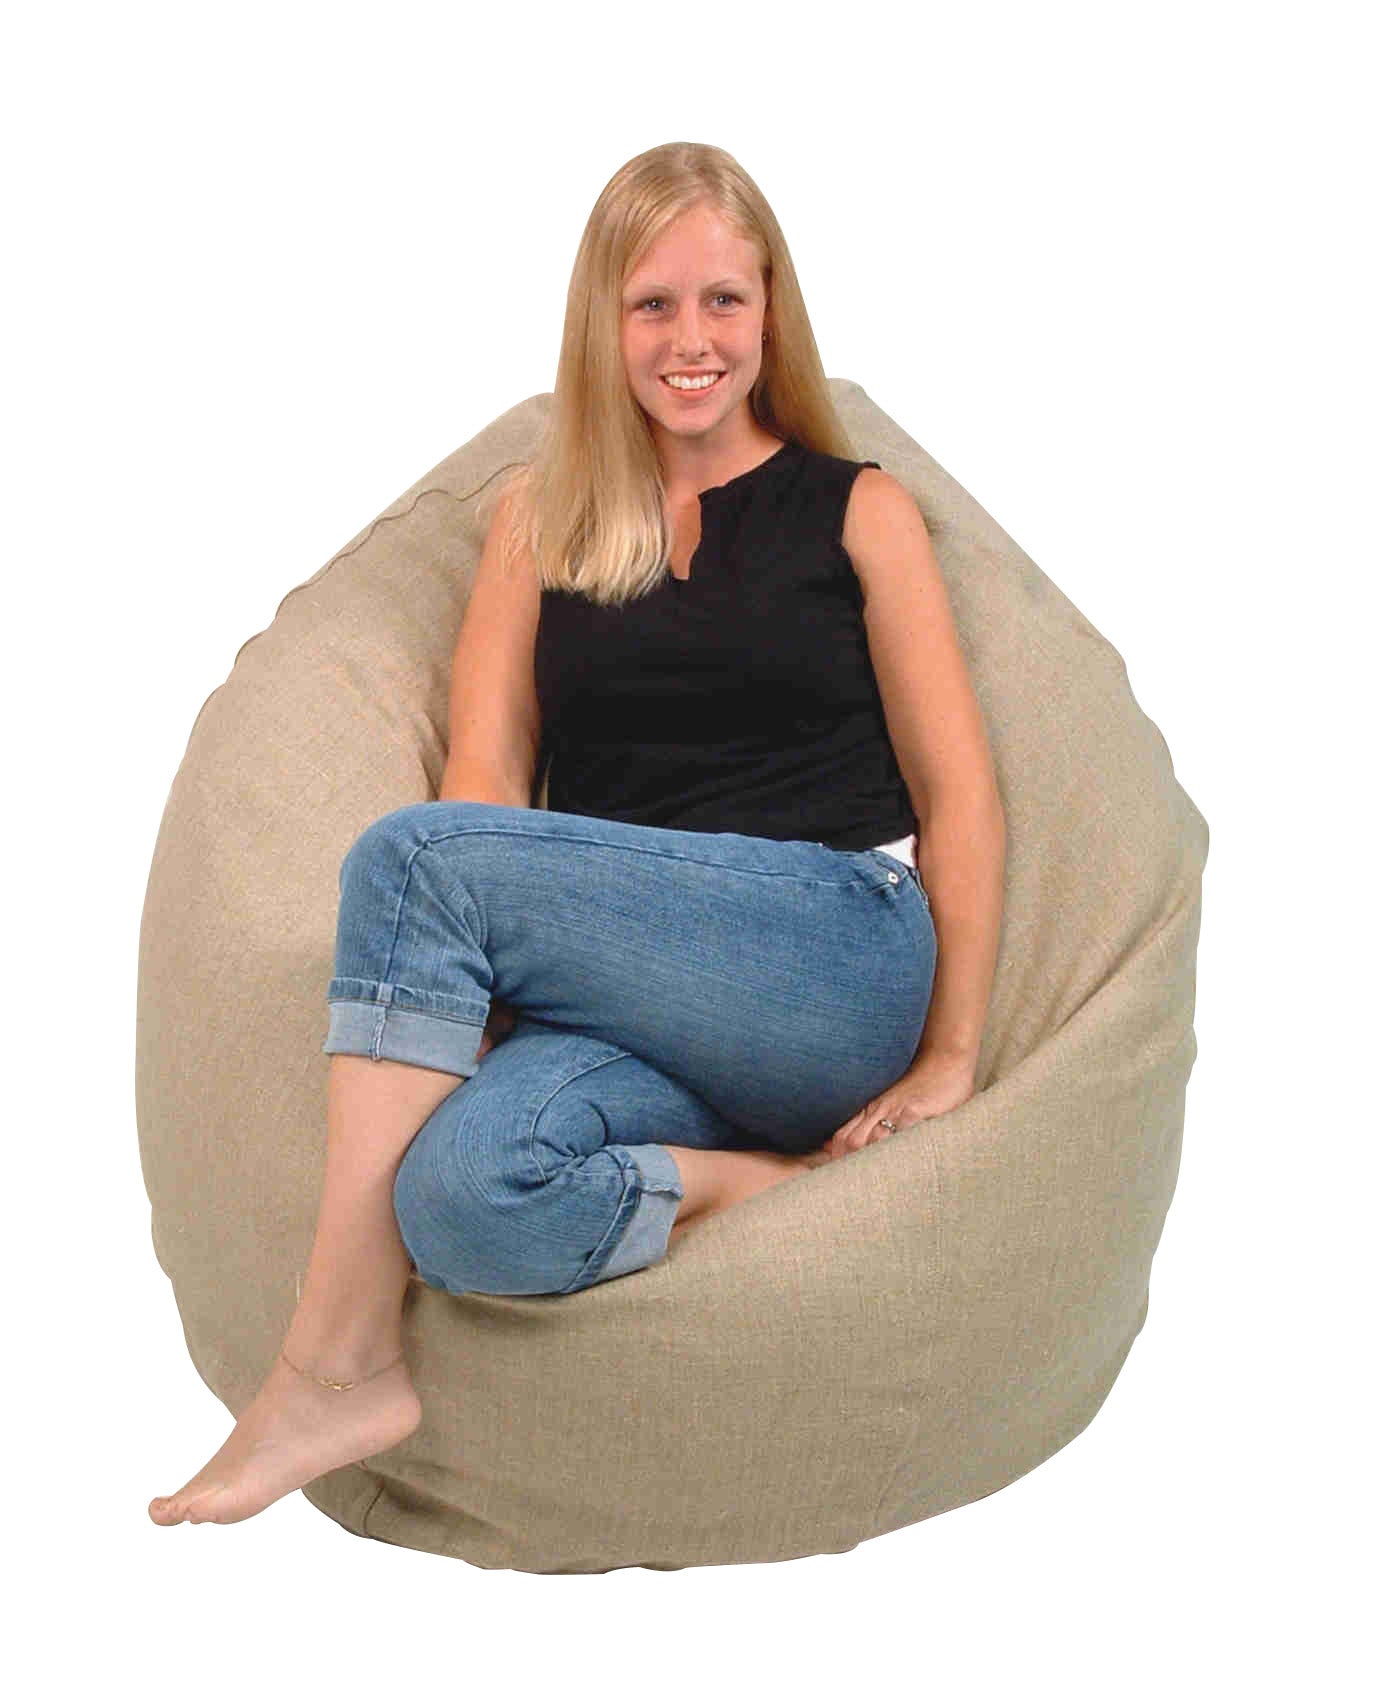 Large Bean Bag Chair Cover, Adult Bean Bag, Beanbag, Large Pouf, Adult  Lounge Chair, Gamer Chair, Floor Pillow, Teen Bean Bag, COVERS ONLY 